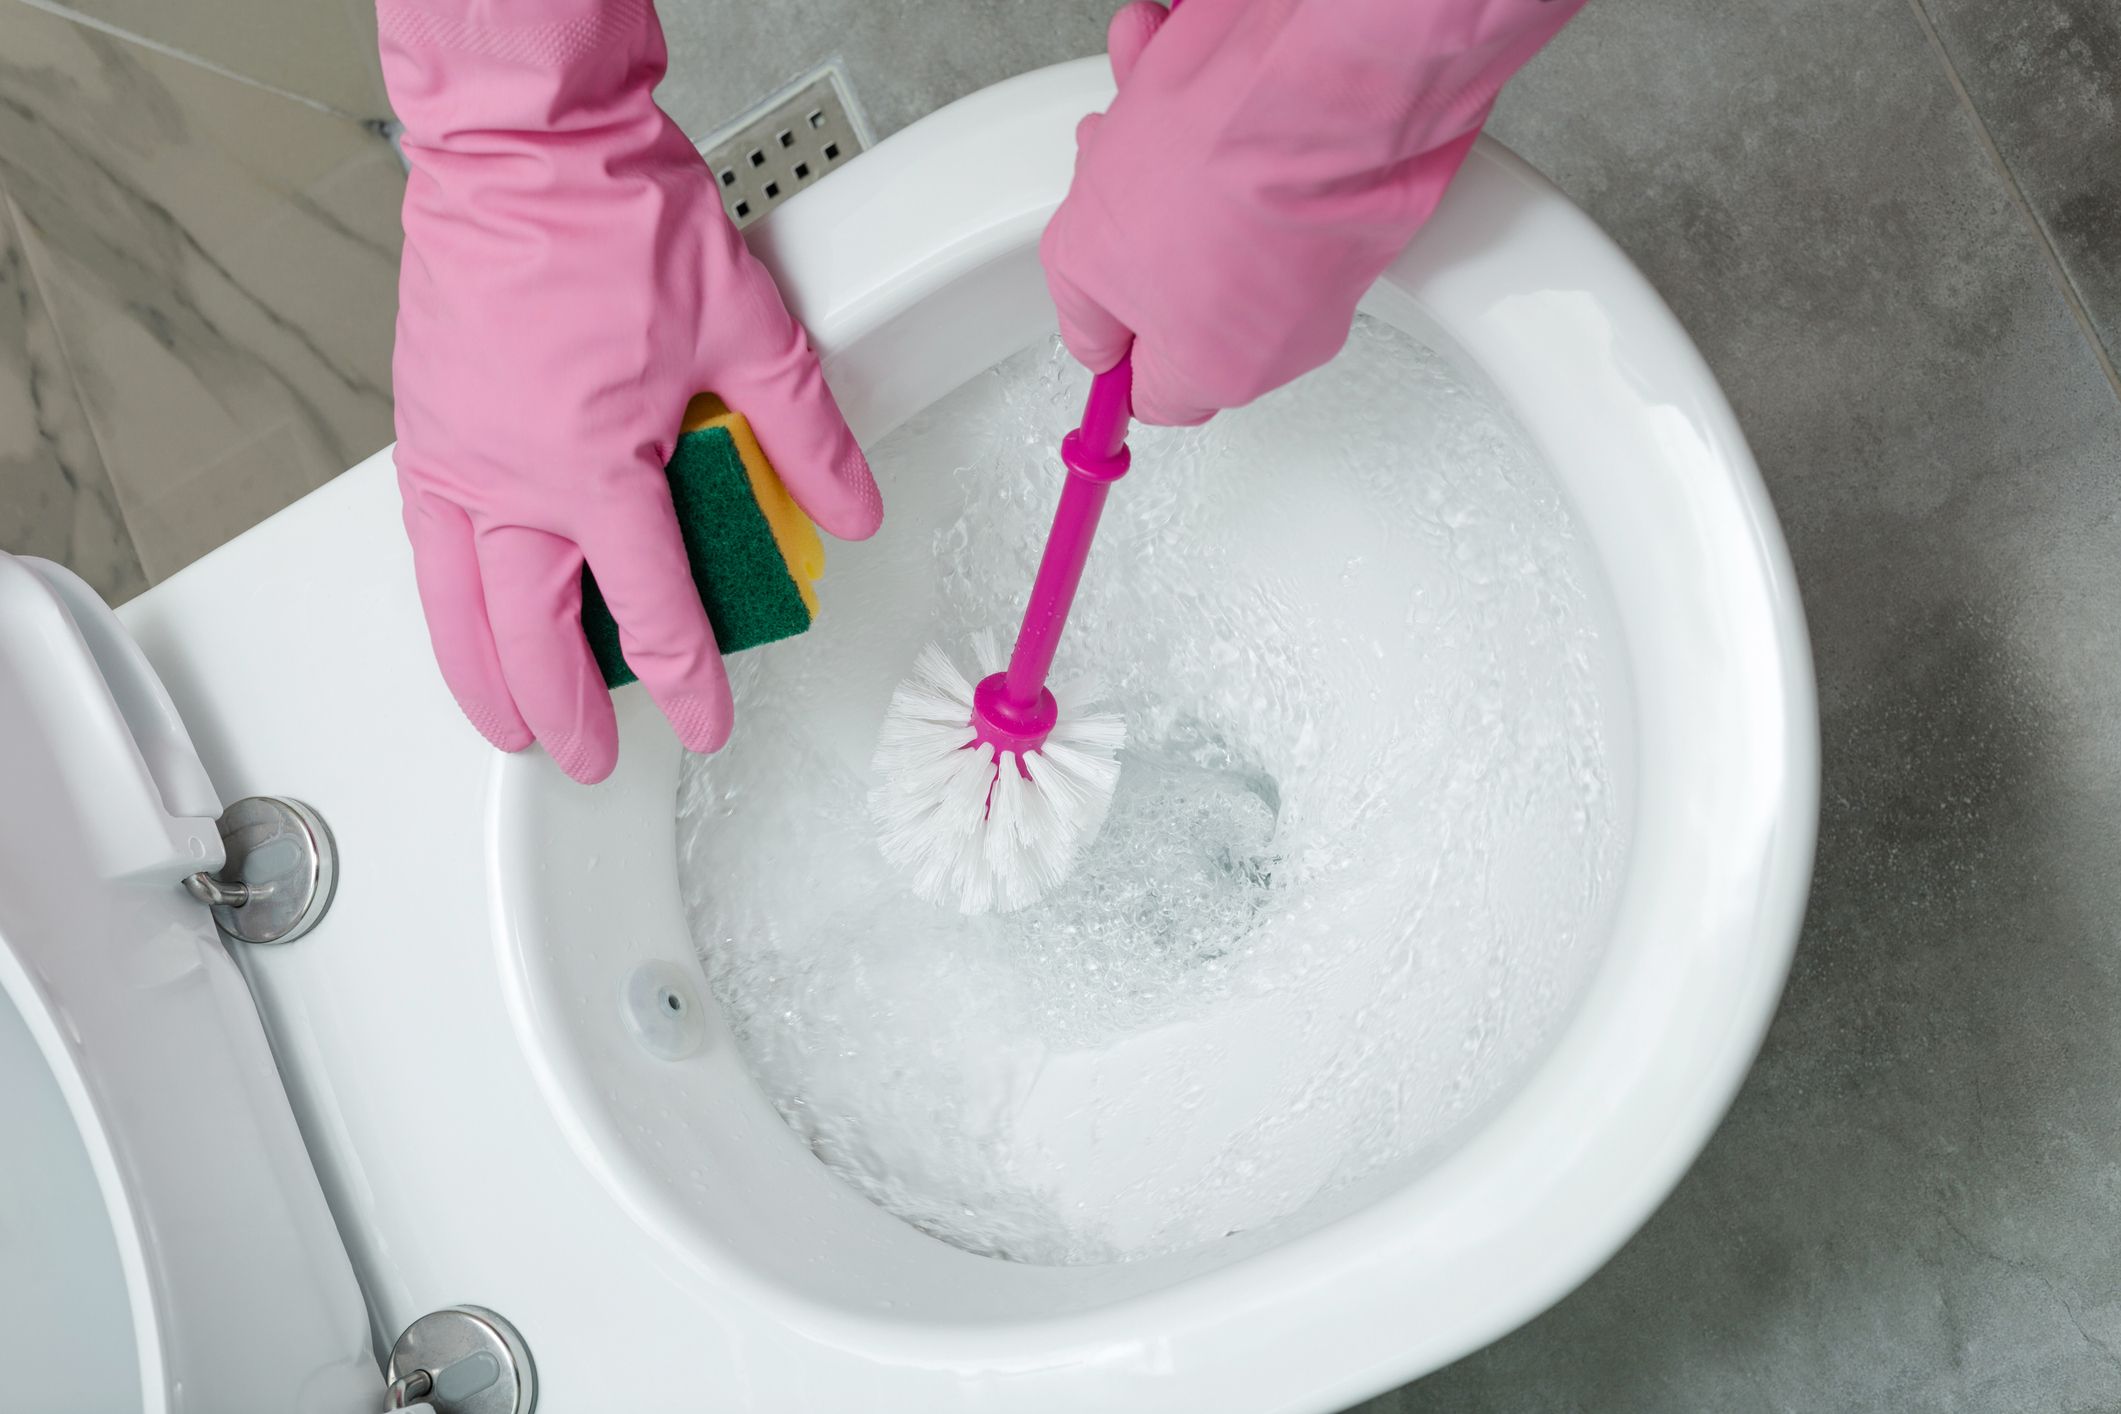 How To Clean A Toilet Without Brush